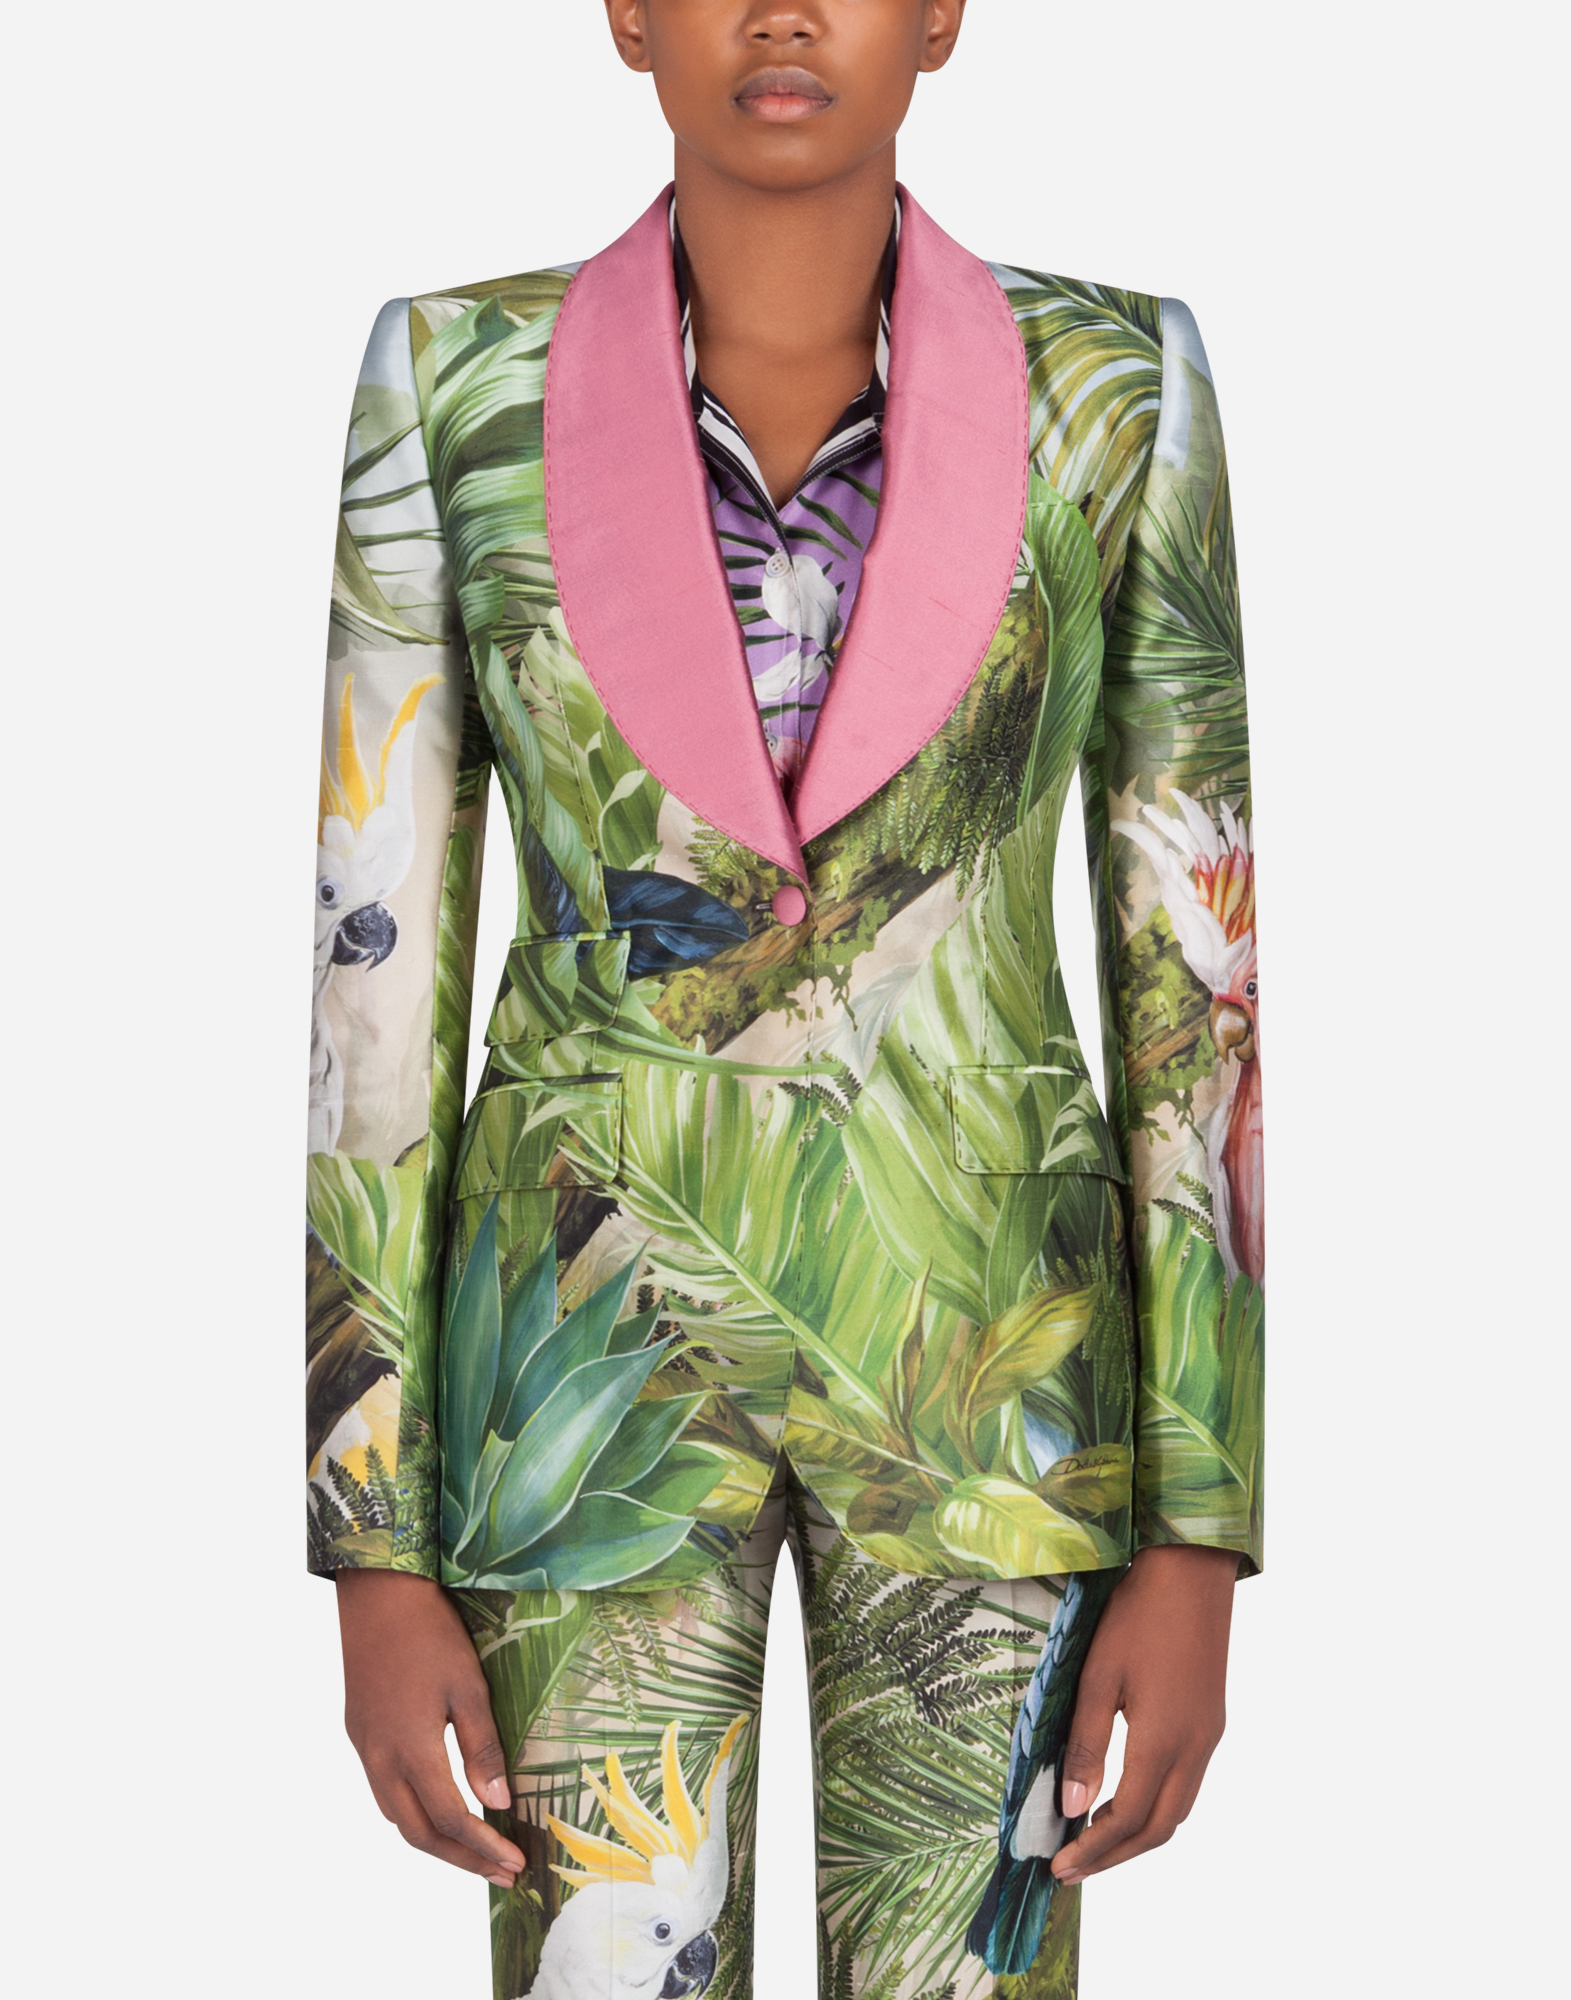 DOLCE & GABBANA SINGLE-BREASTED JACKET IN SHANTUNG WITH JUNGLE FOREST PRINT